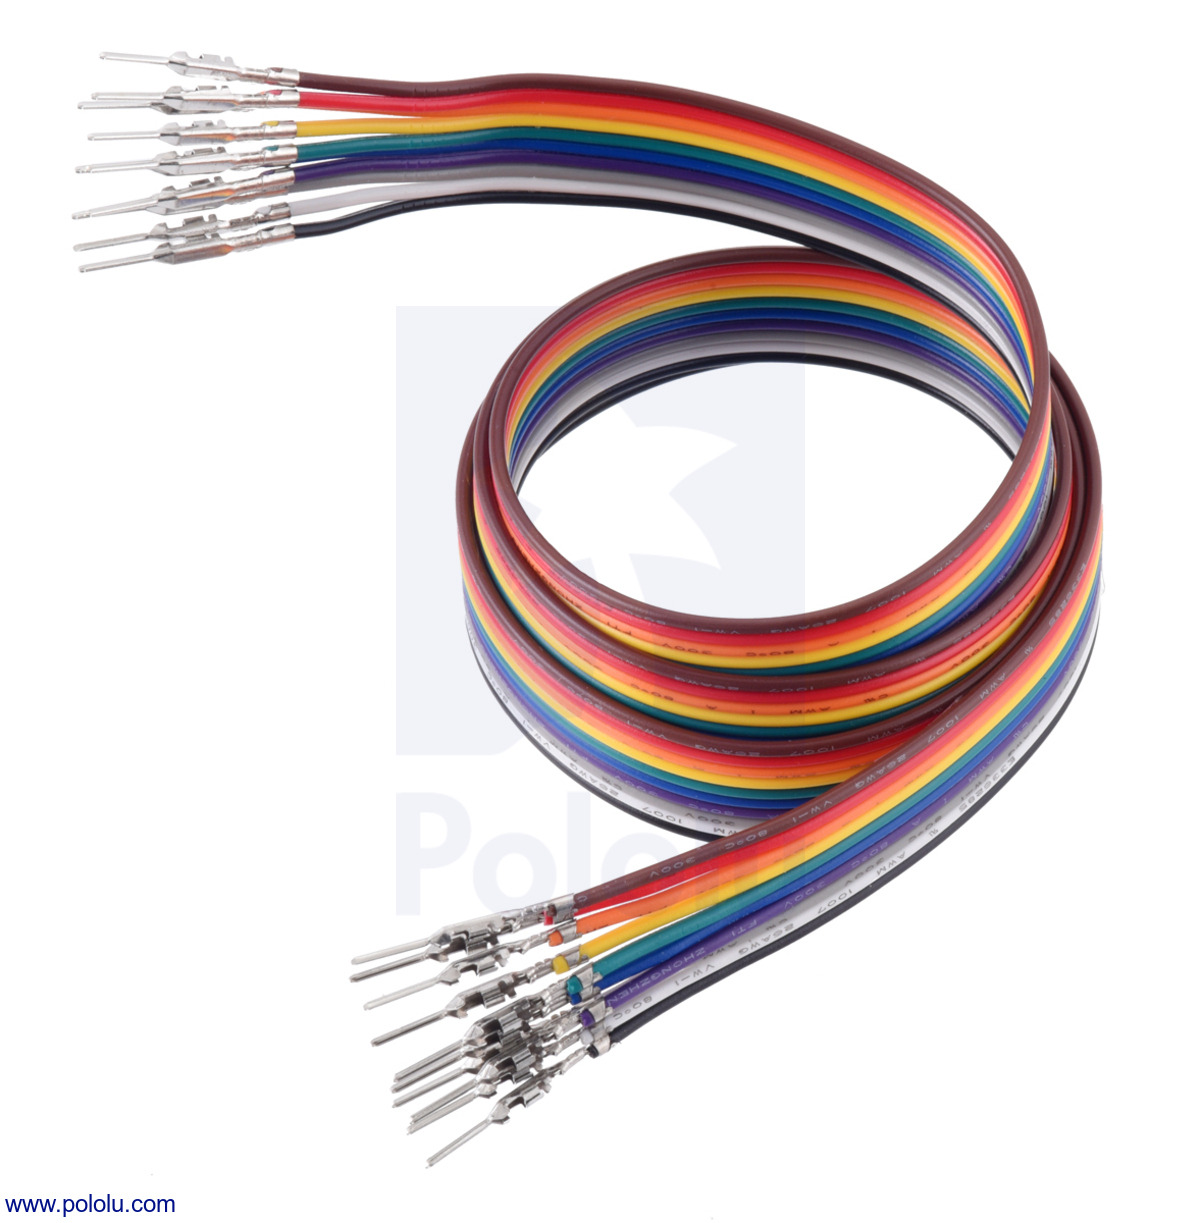 Pololu - Ribbon Cable with Pre-Crimped Terminals 10-Color M-M 24 (60 cm)